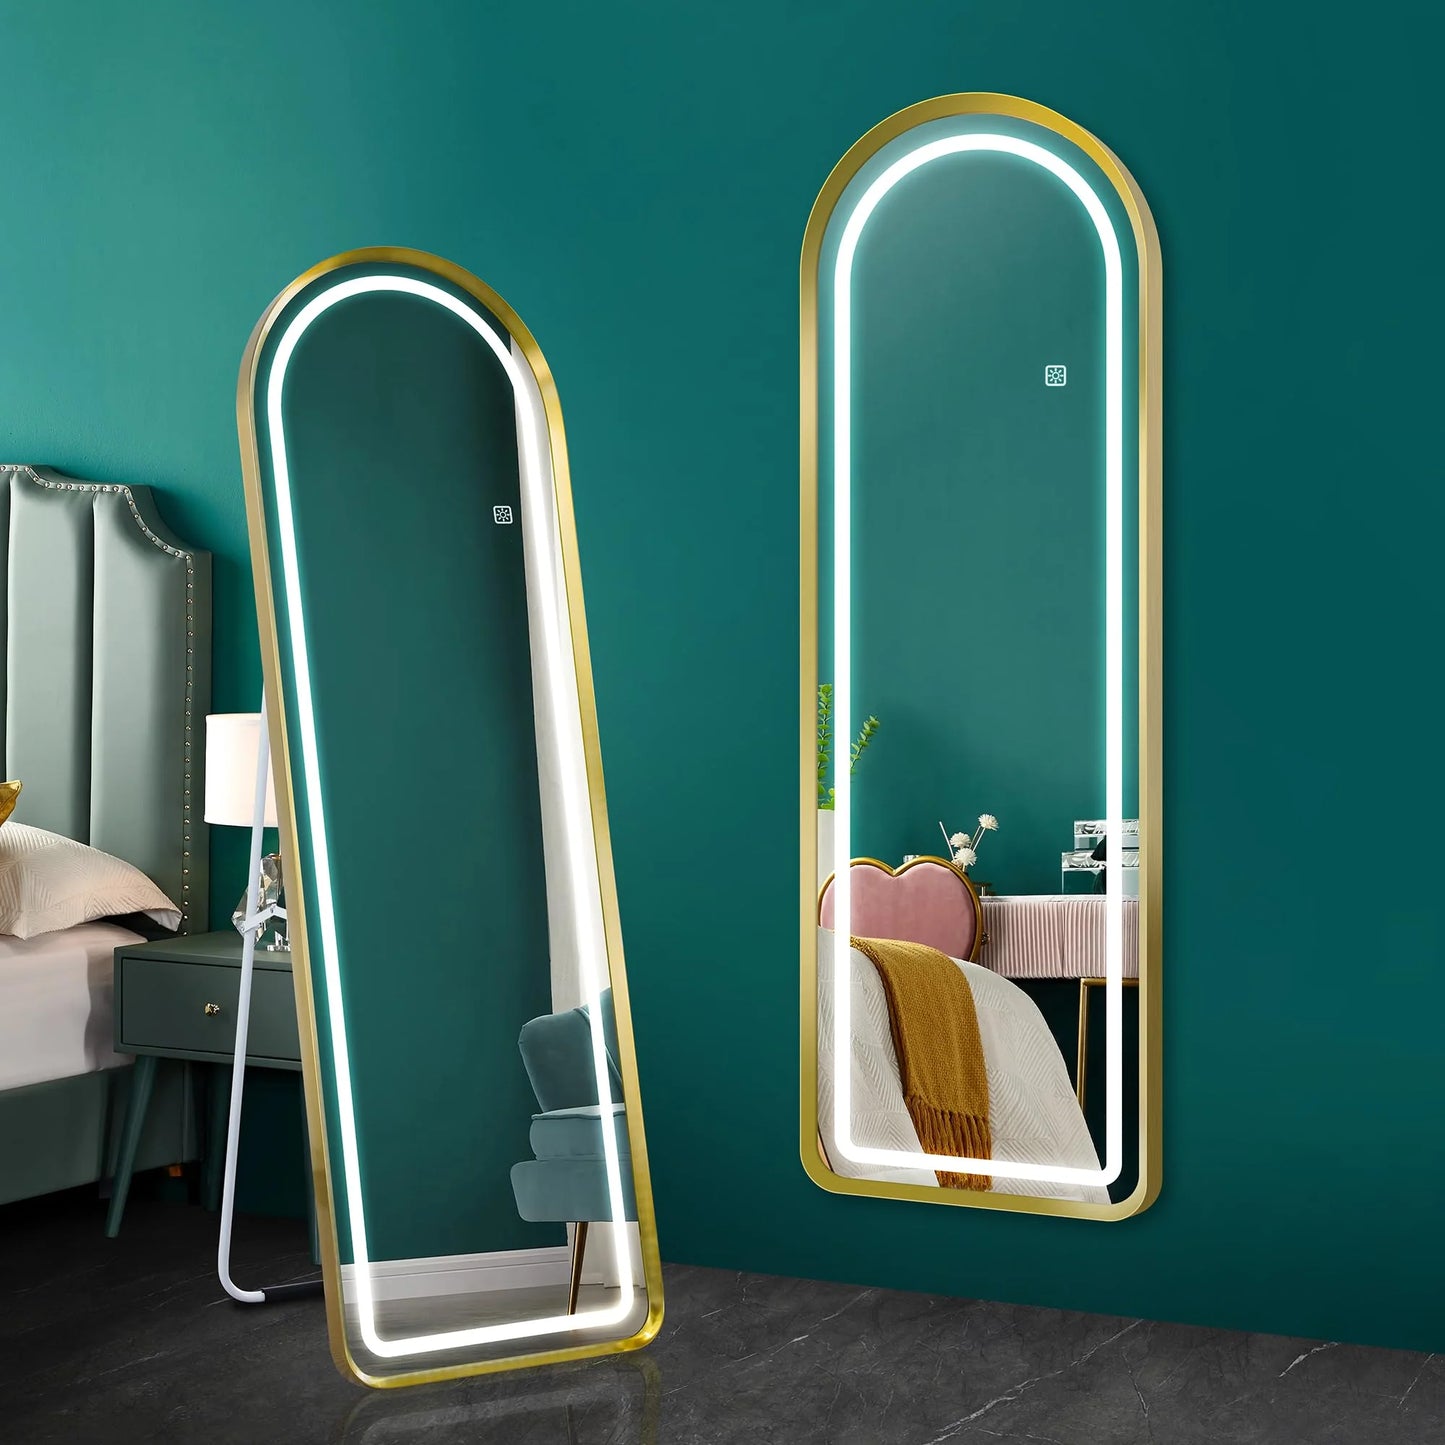 SBAGNO 63" x 20" Led Mirror Full Length,Full Length Mirror with Lights Arch Design,Dimming & 3 Color Modes,Lighted Full Body Length Light up Mirror Touch,Free Standing,Wall Mounted